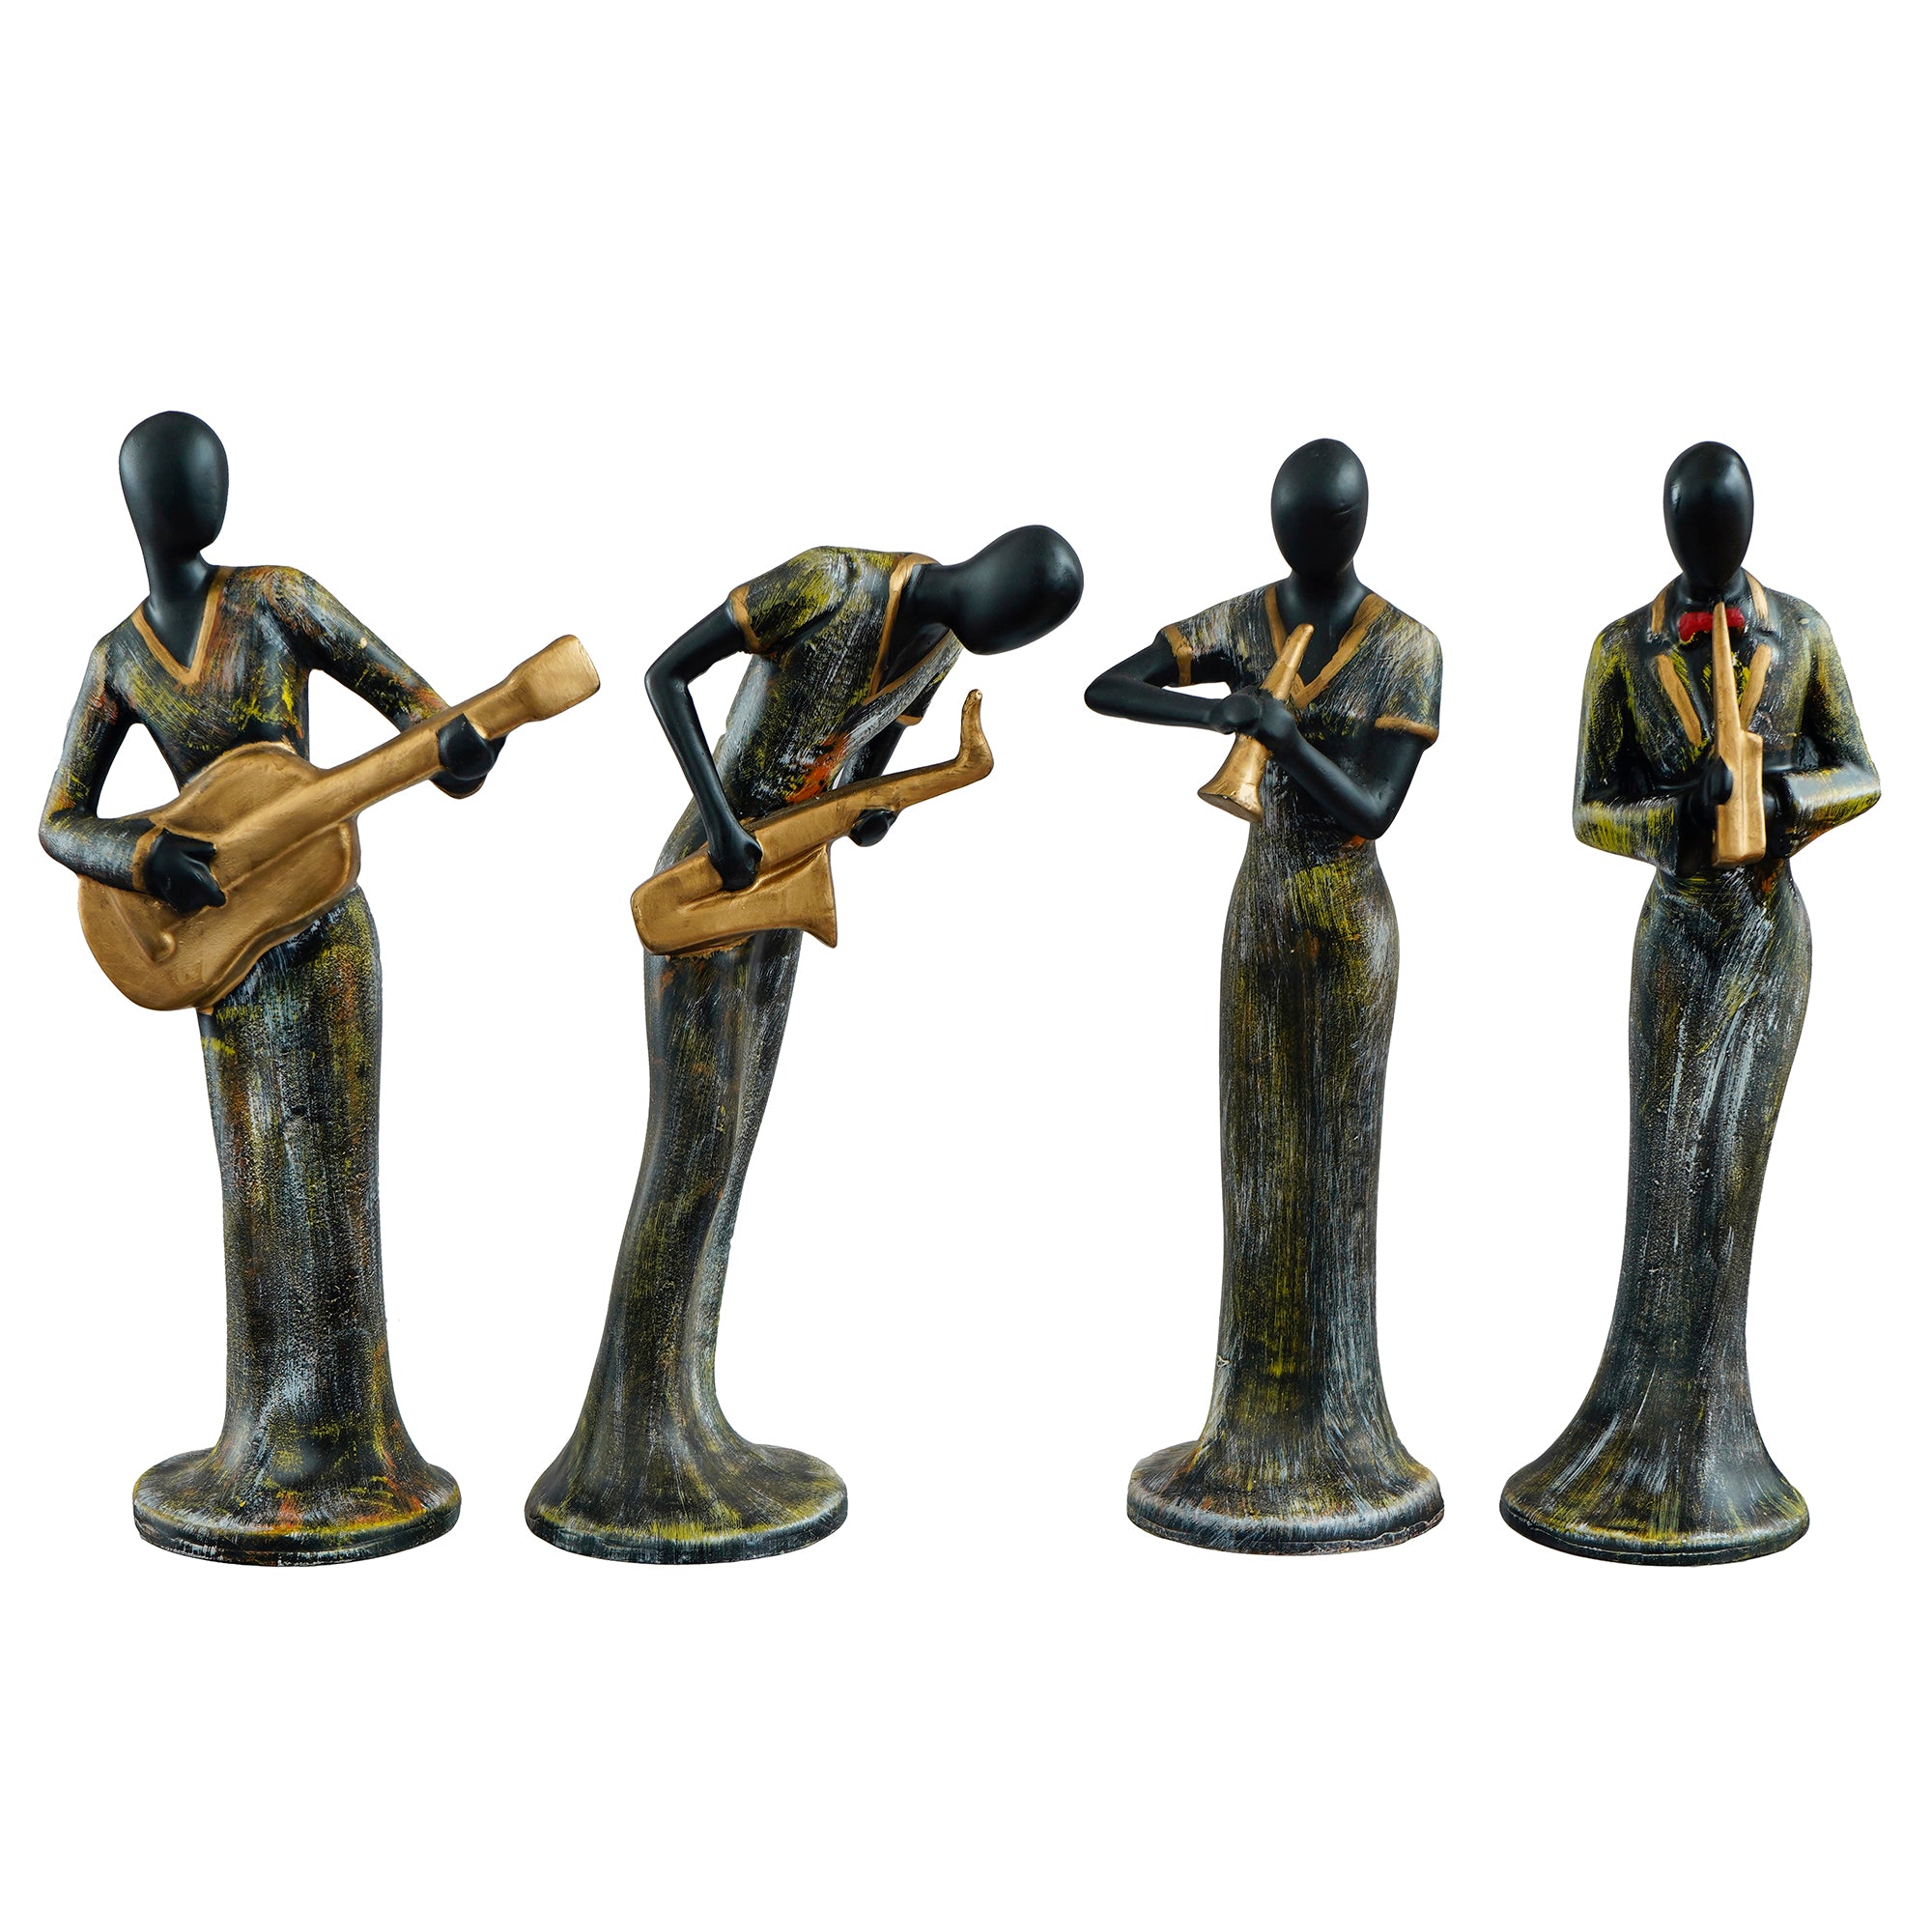 Grey and Black Polyresin Set of 4 Ladies figurines Playing Clarinet, Guitar, Wind, Saxophone Musical Instrument Handcrafted Decorative Showpiece 2